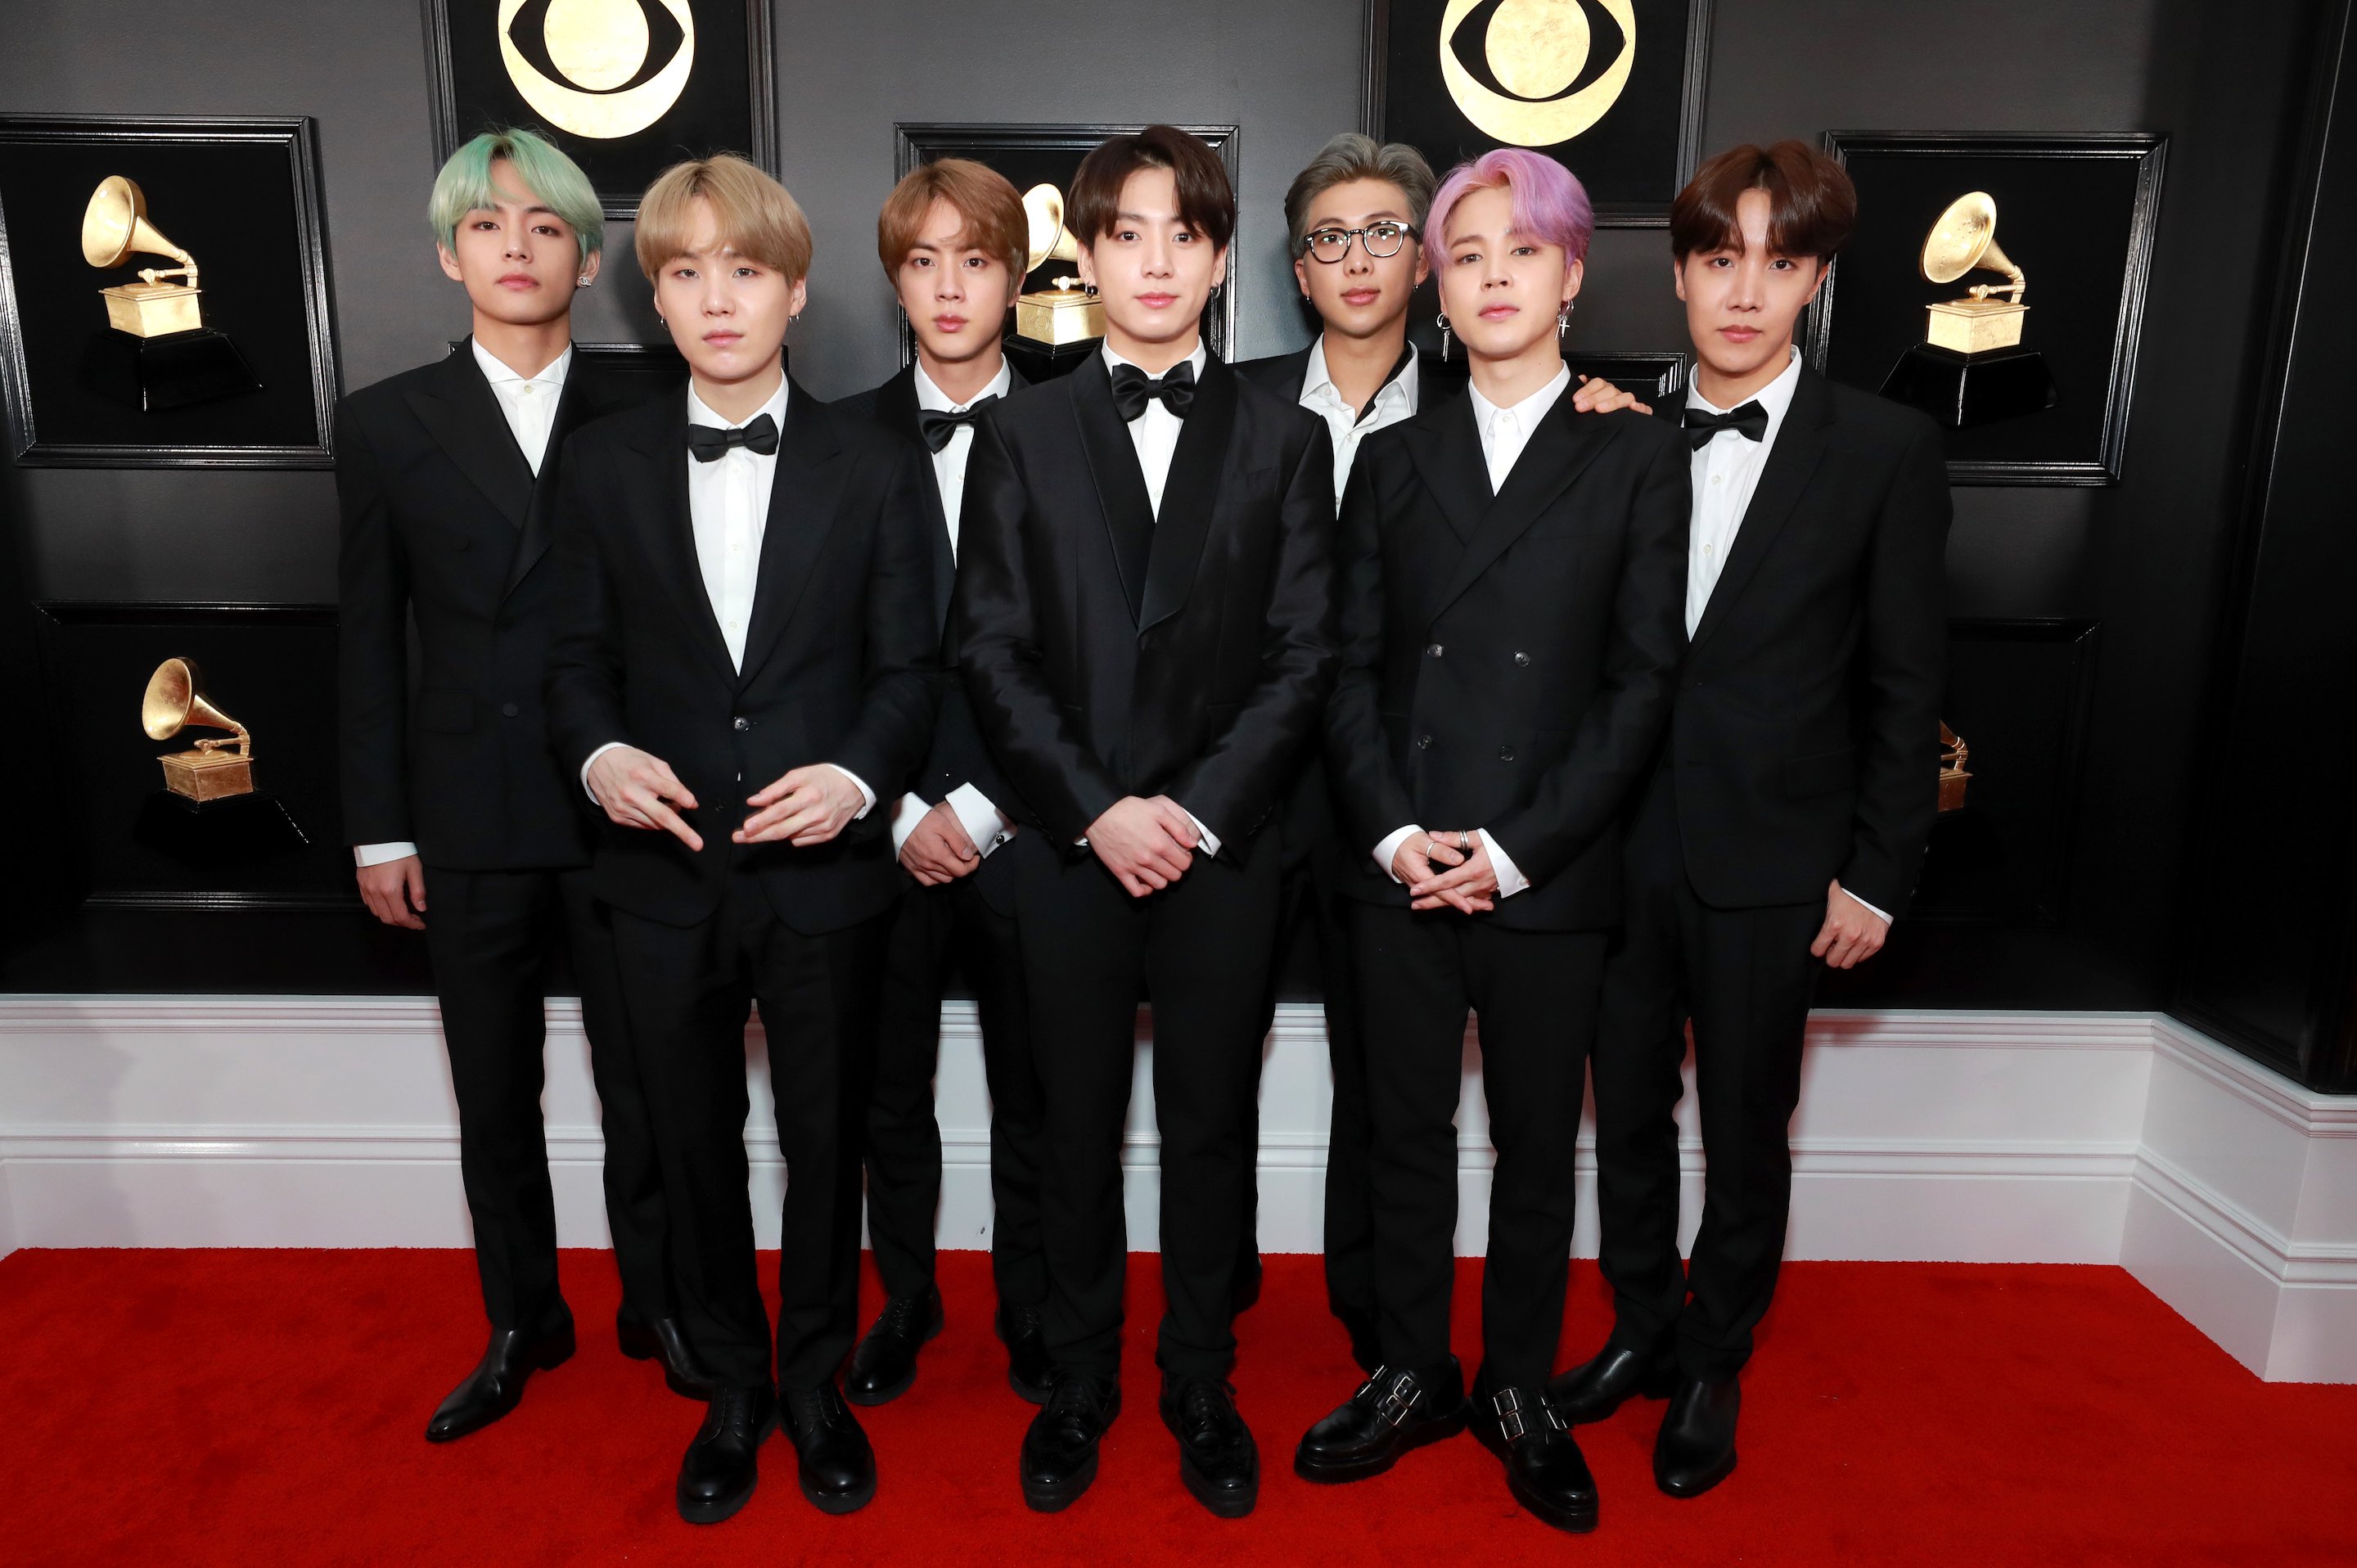 BTS members attend the Grammy Awards 